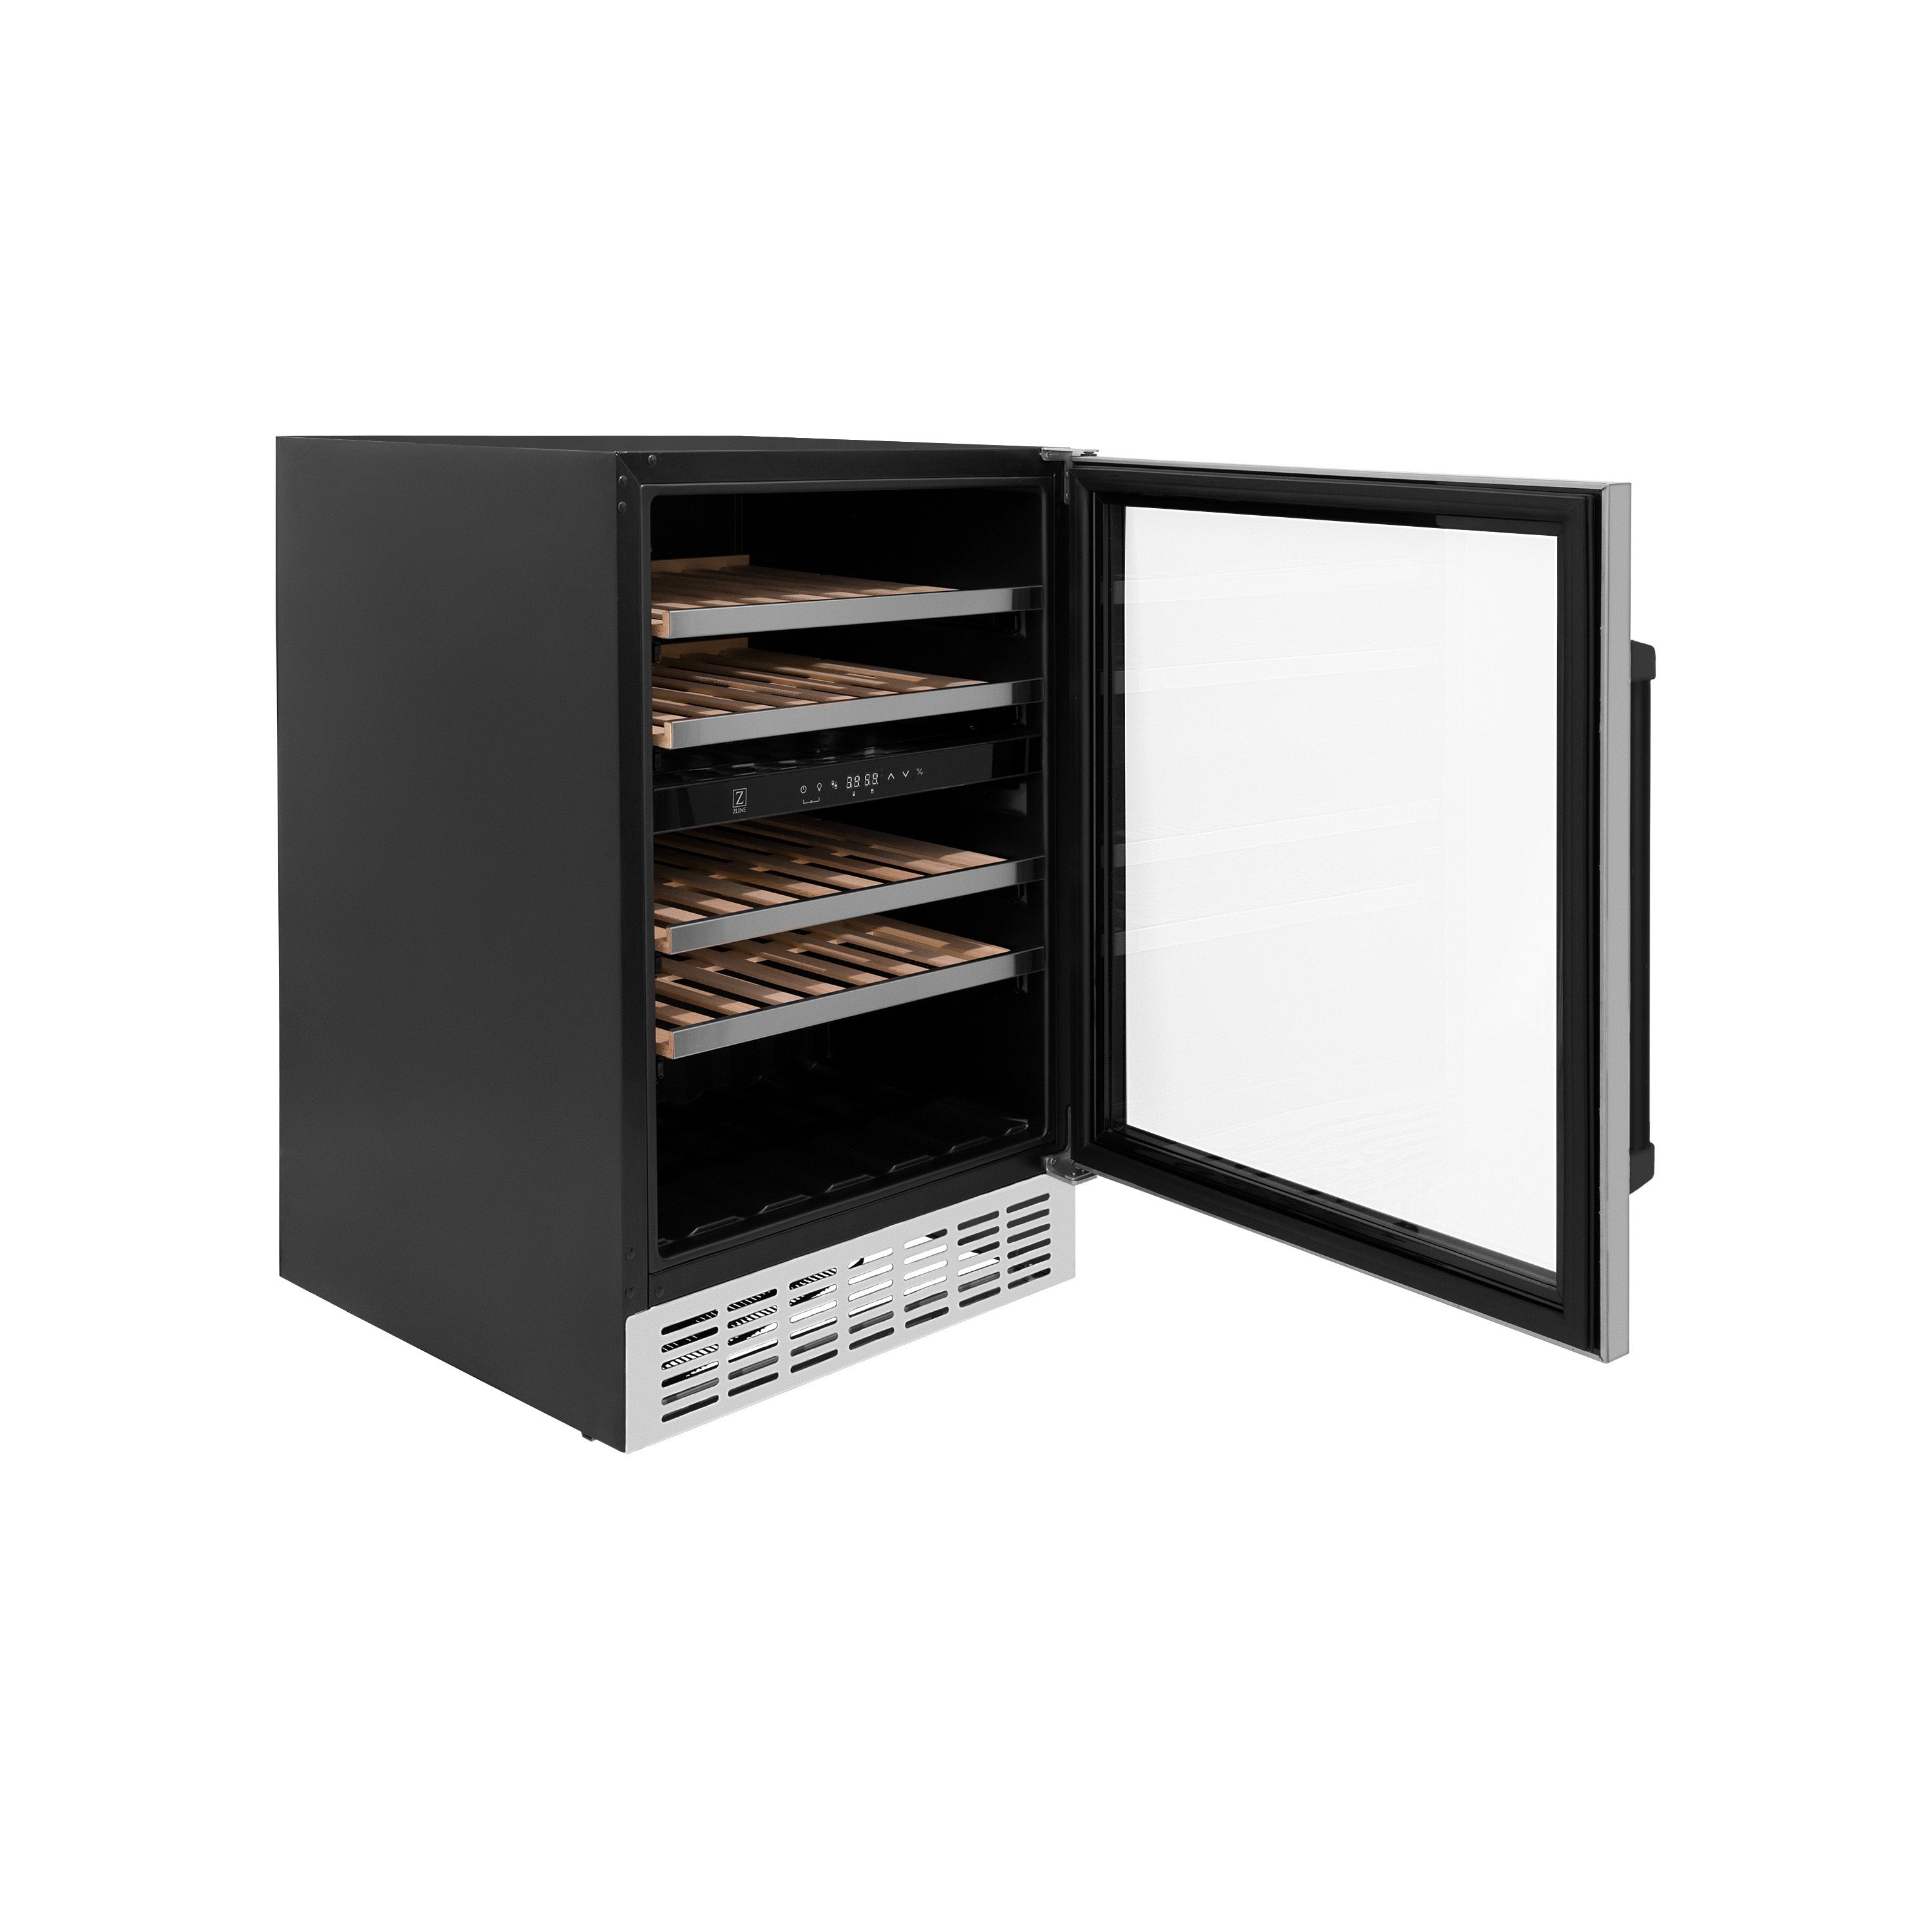 ZLINE 24" Monument Autograph Edition Dual Zone 44-Bottle Wine Cooler in Stainless Steel with Matte Black Accents (RWVZ-UD-24-MB)